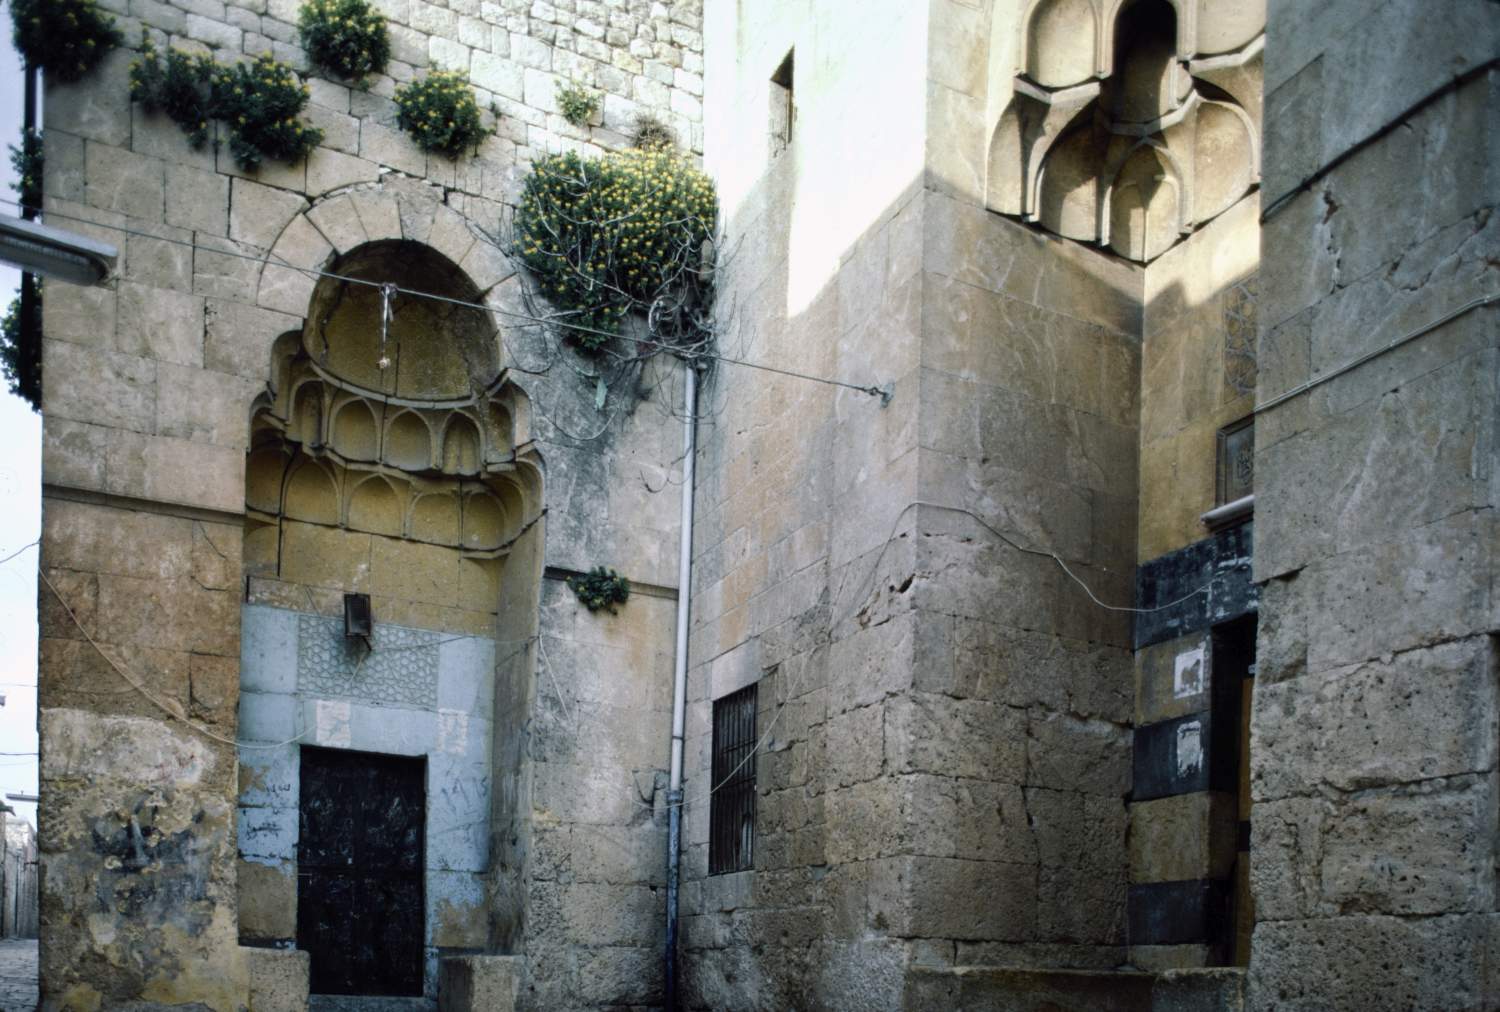 View of entrance portals, with small north portal to residential unit at left and larger entrance portal to madrasa at right.